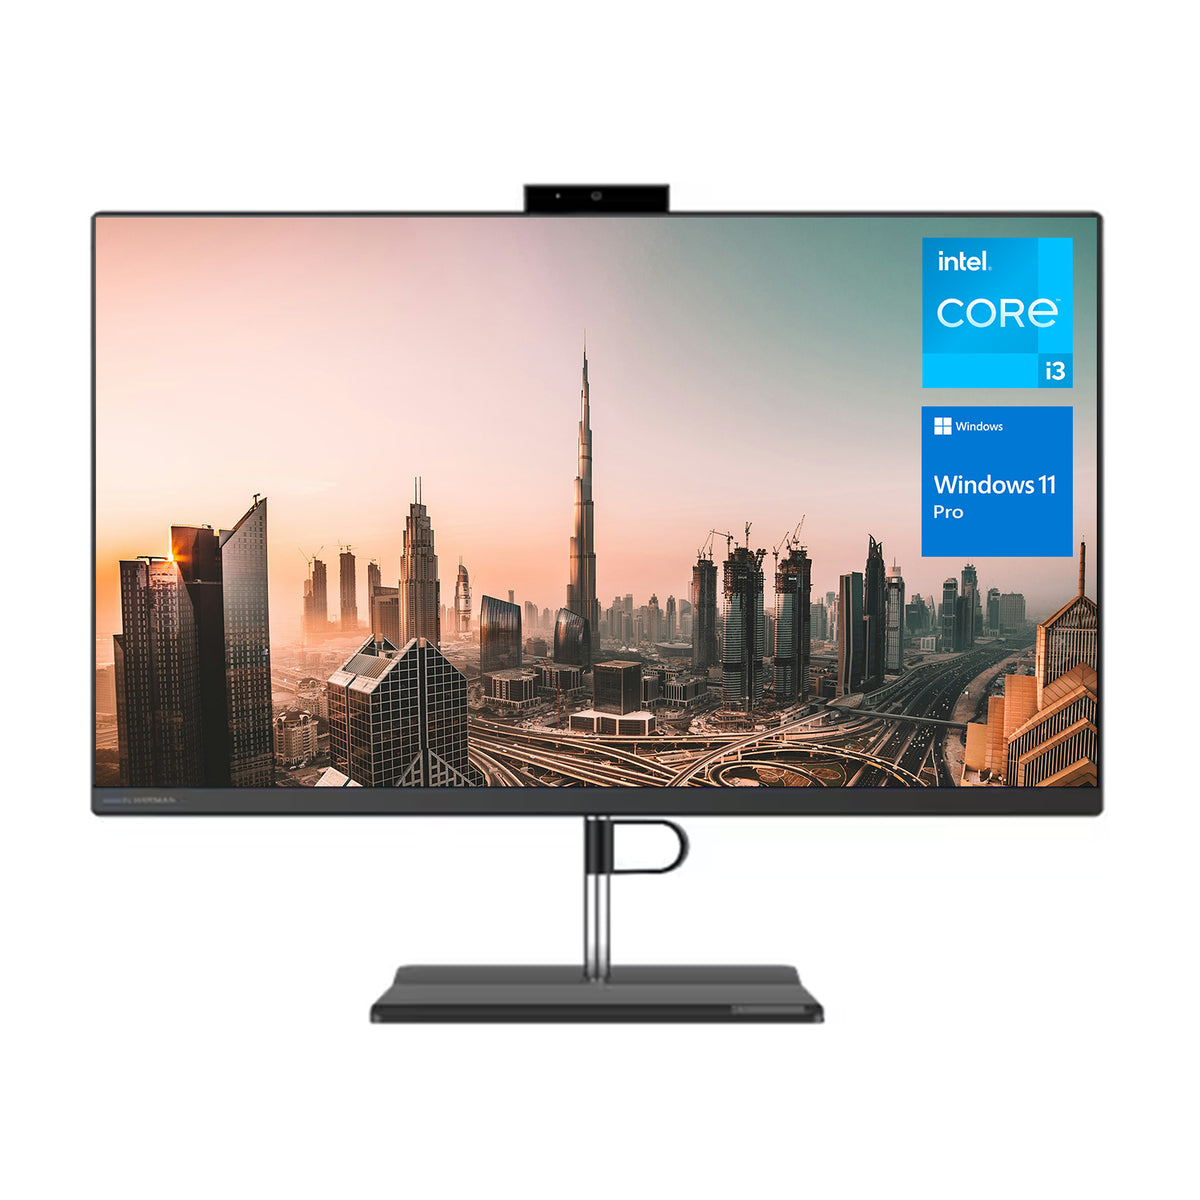 Lenovo V-Series V30a Business All-in-One, 23.8" FHD 1920*1080 Non-touch 60Hz, Intel Core i3-1115G4, Intel UHD Graphics, 4GB DDR4 SODIMM, 256GB PCIe M.2 SSD, Wi-Fi 5, No OS, Black